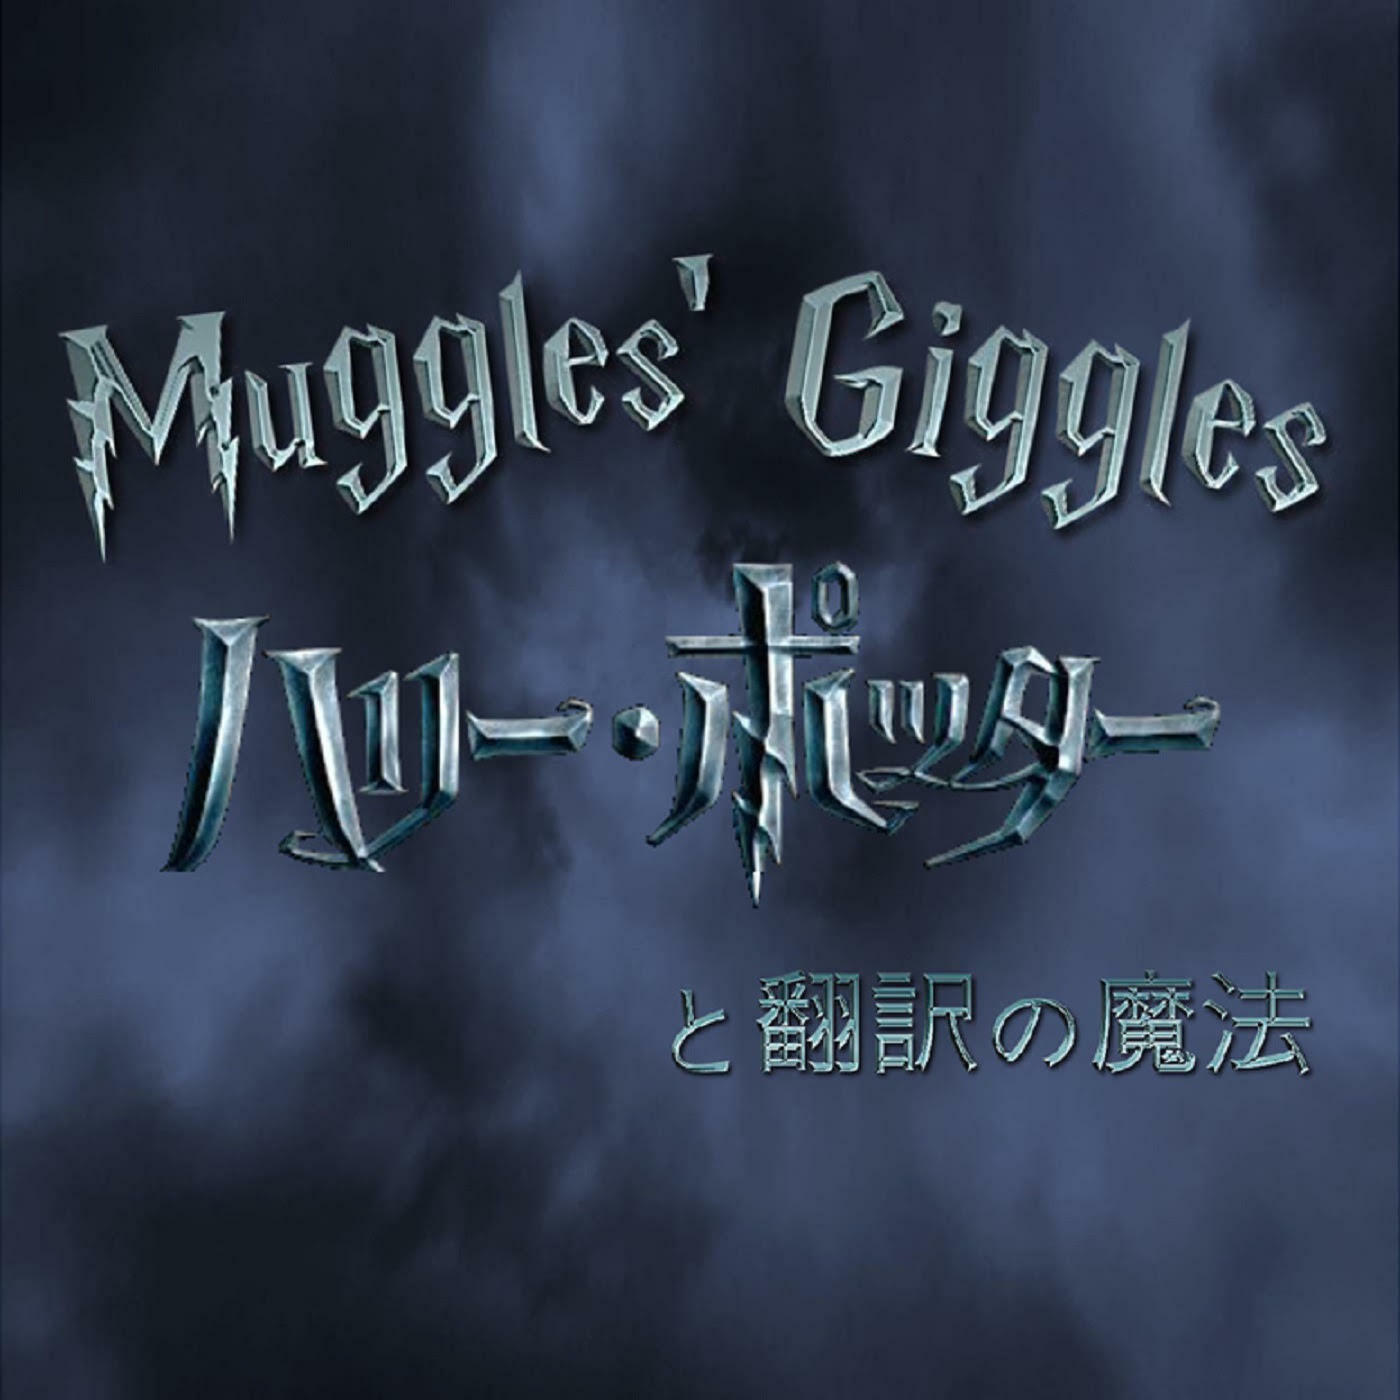 Listen To The Muggles Giggles ハリーポッターと翻訳の魔法 Episode 1 9 The Midnight Duel 真夜中の決闘 On Iheartradio Iheartradio